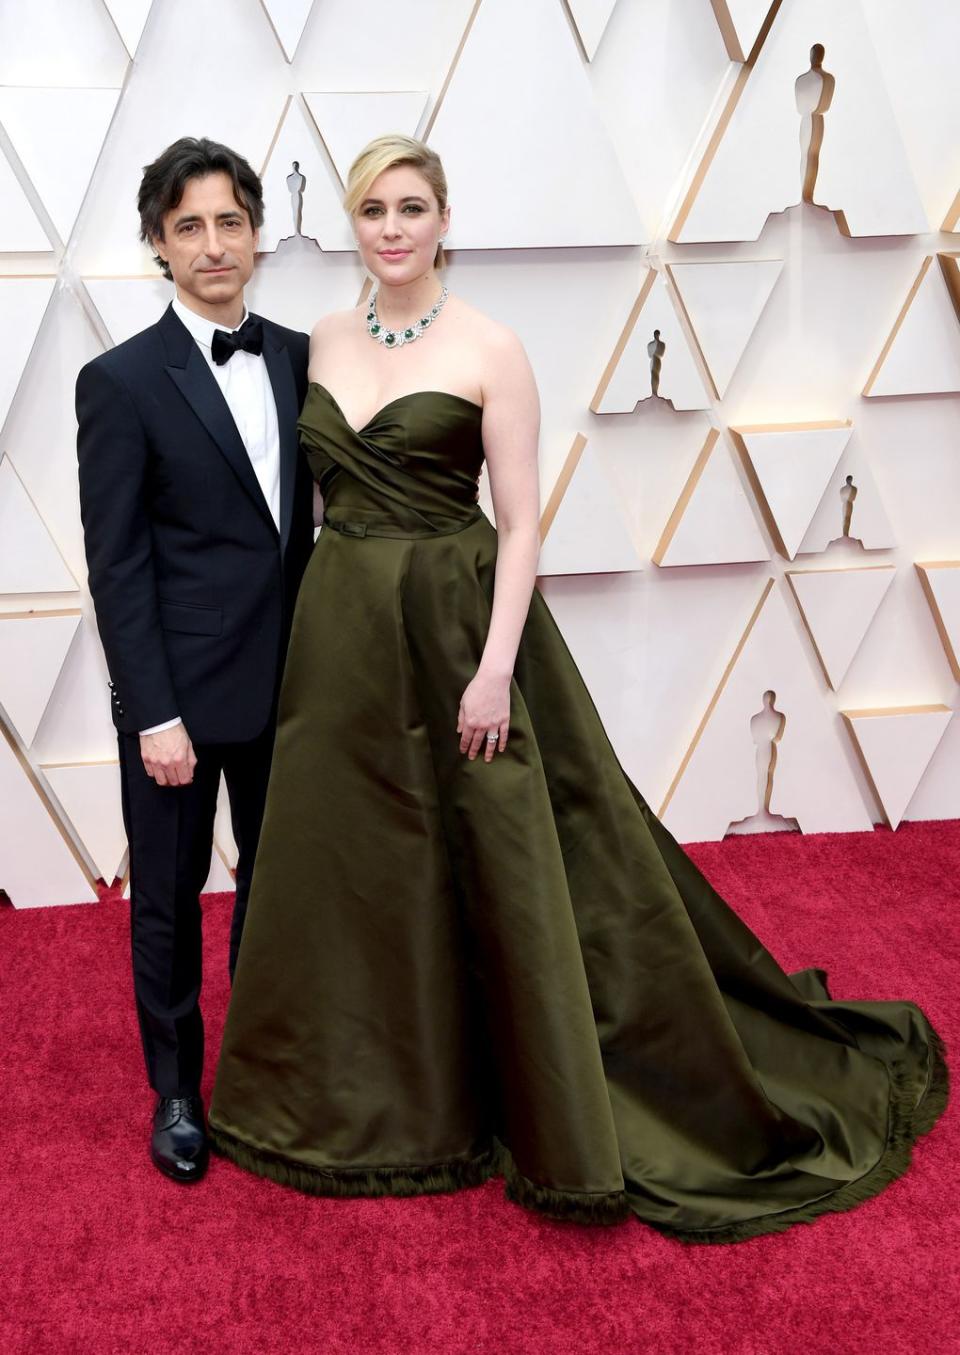 The cutest couples at the Oscars 2020